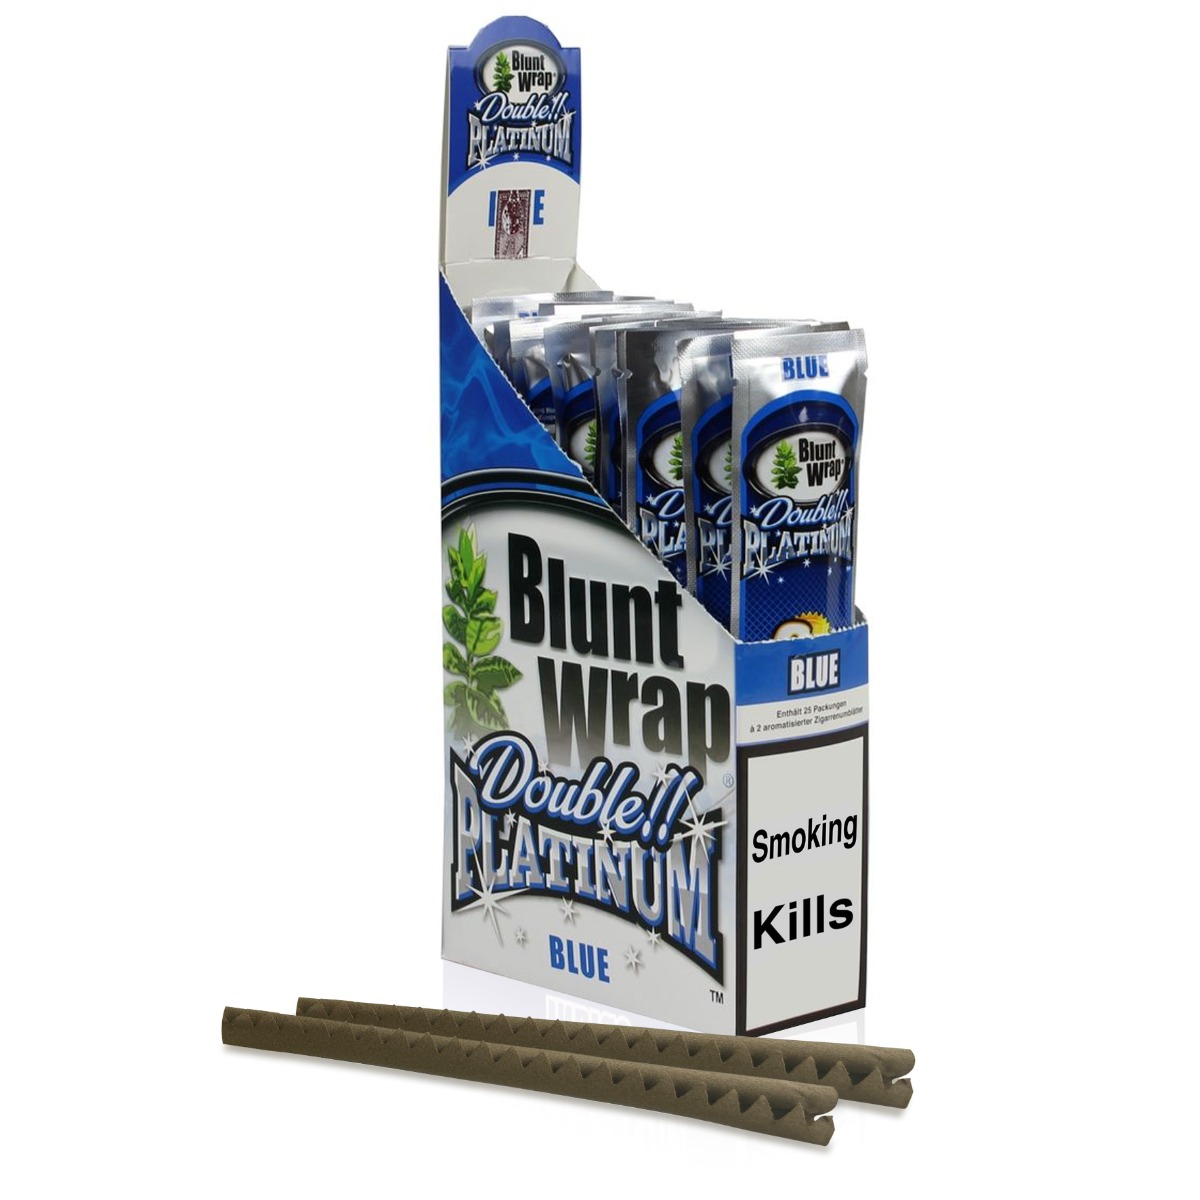 Blunt wrap double platinum - Blue (previously blueberry burst) - pack of 2